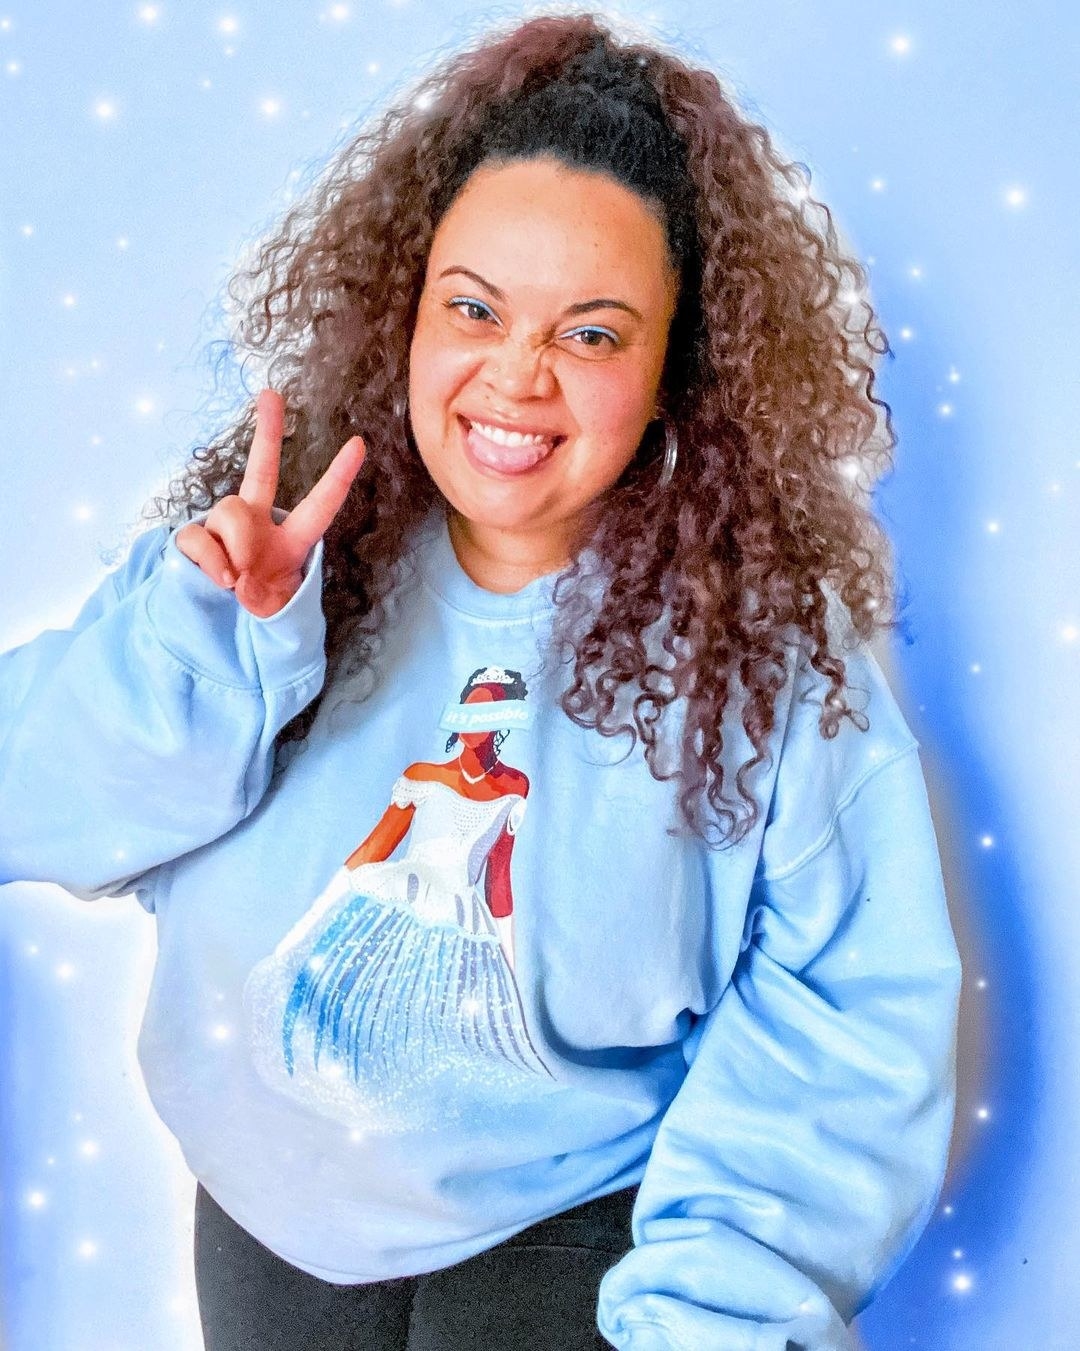 A BuzzFeed editor in a light-blue sweatshirt with an illustration of  Brandy as Cinderella on it